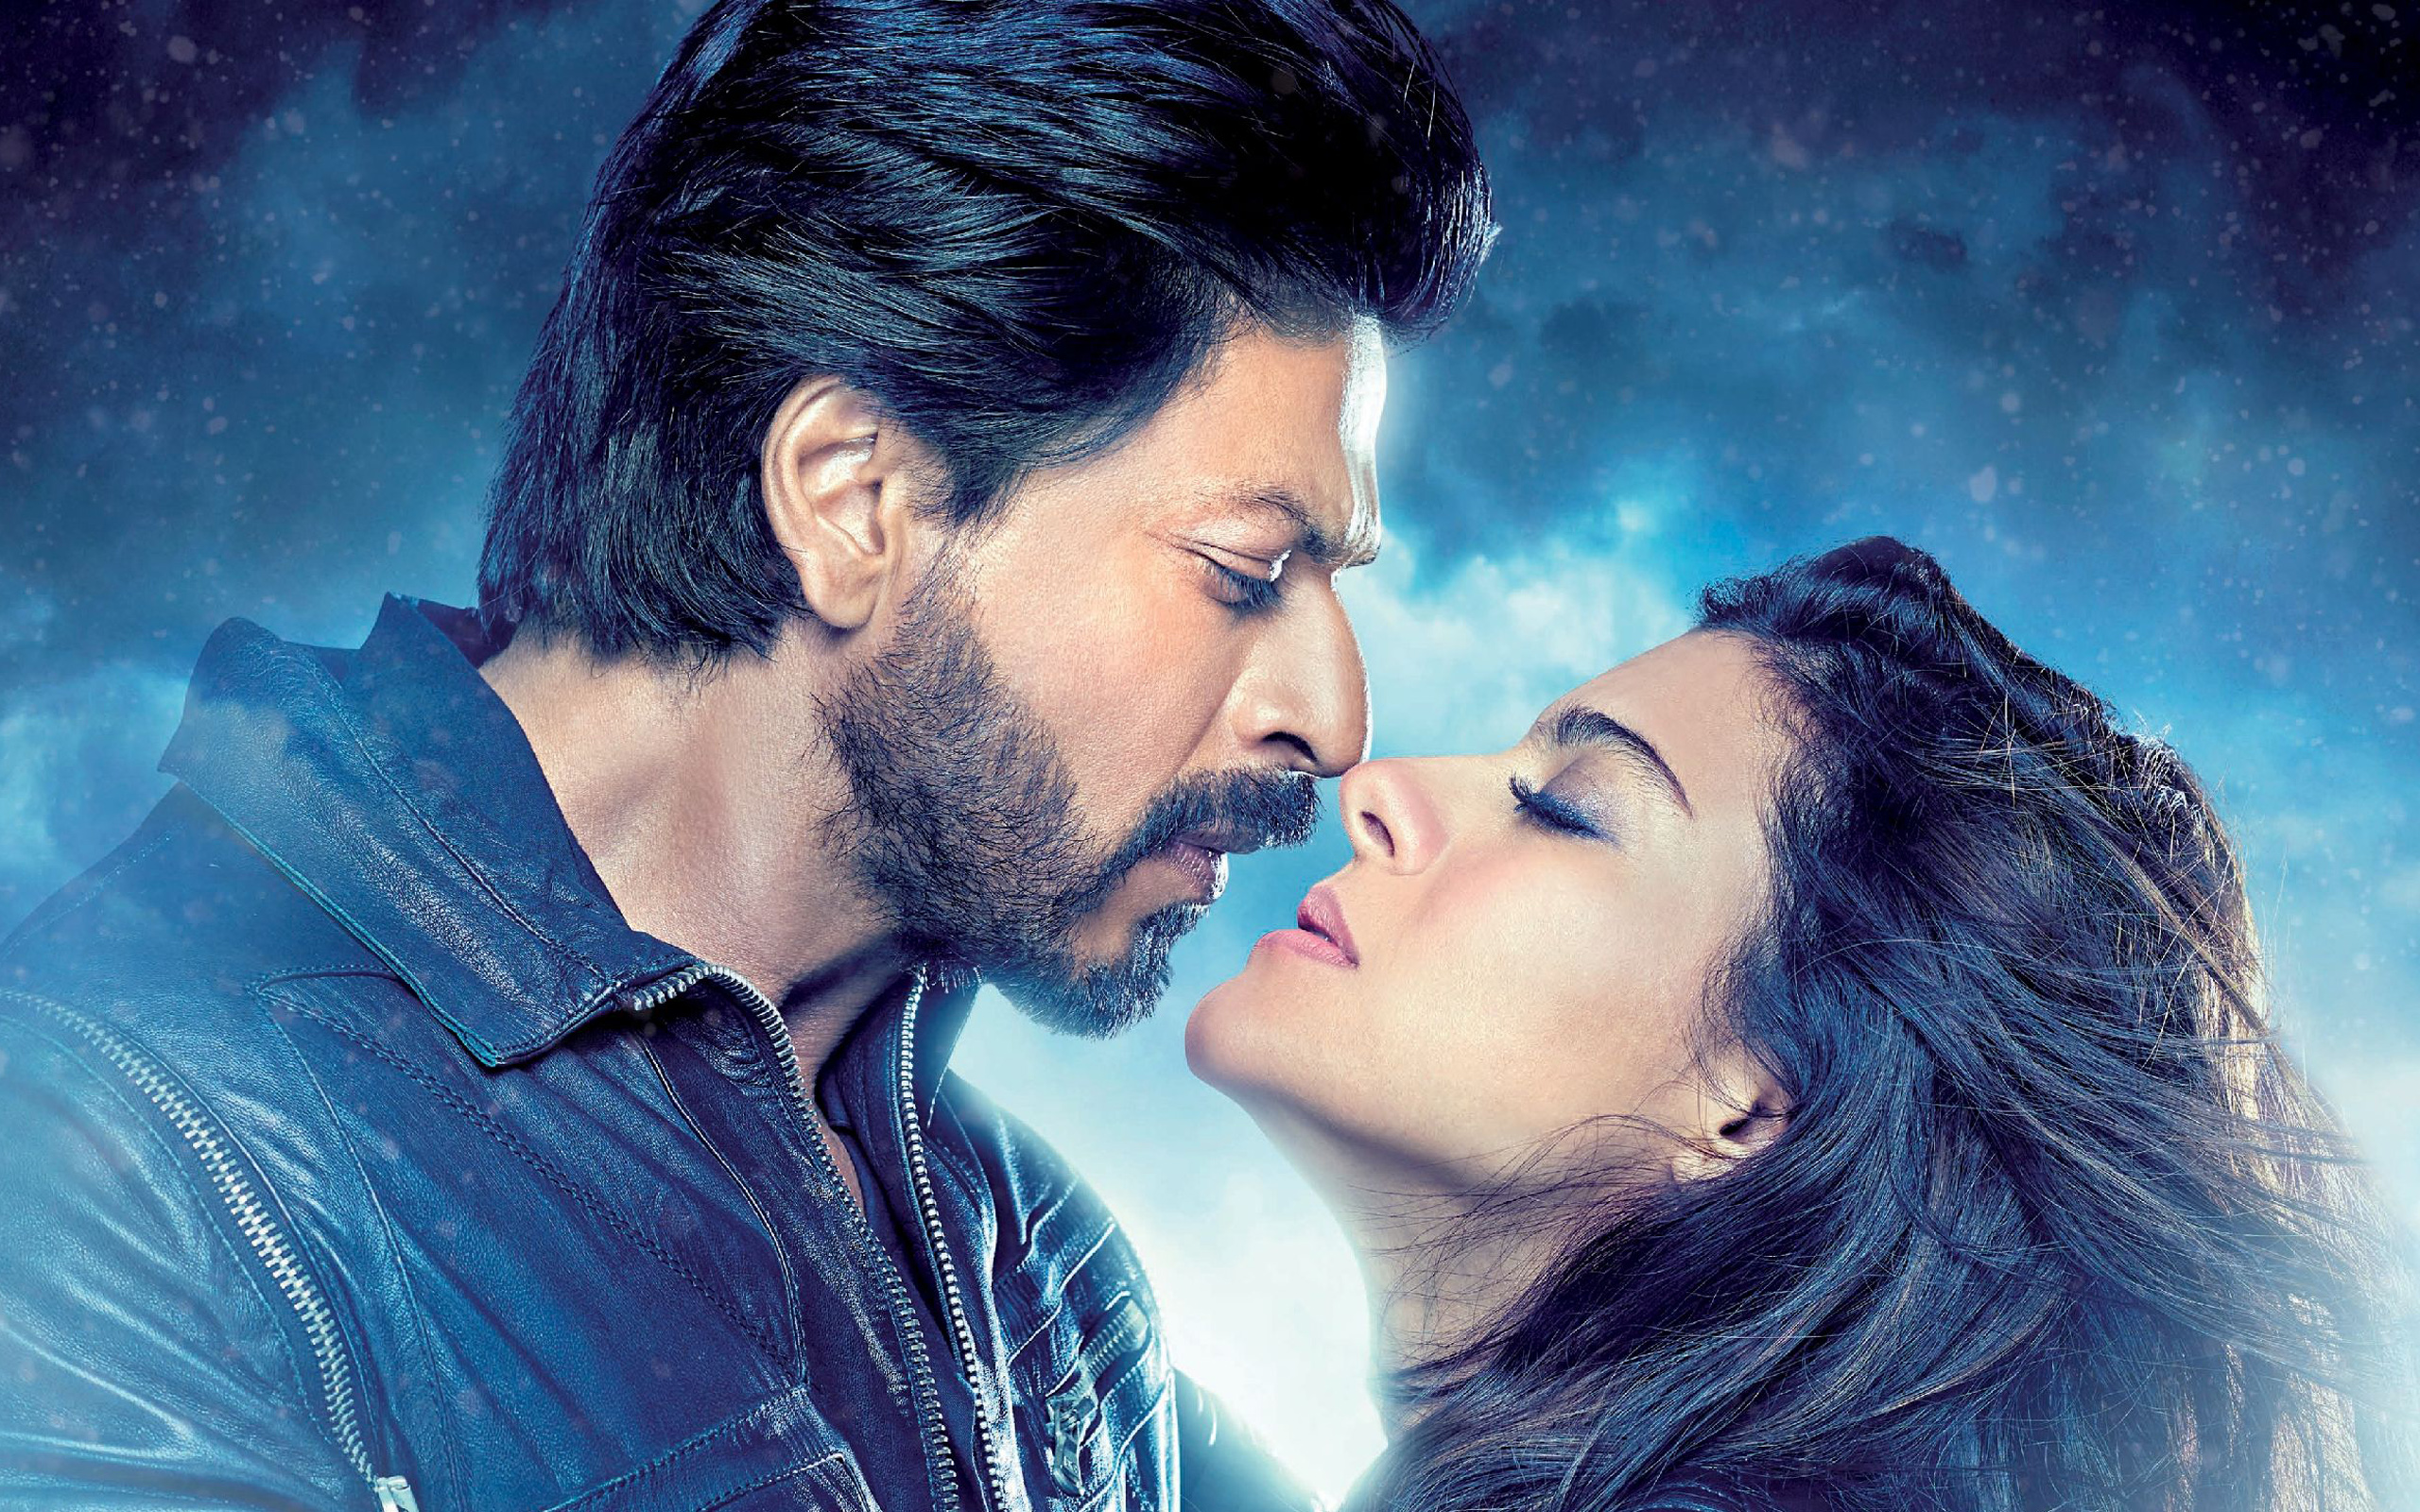 dilwale wallpaper download,romance,forehead,love,interaction,kiss